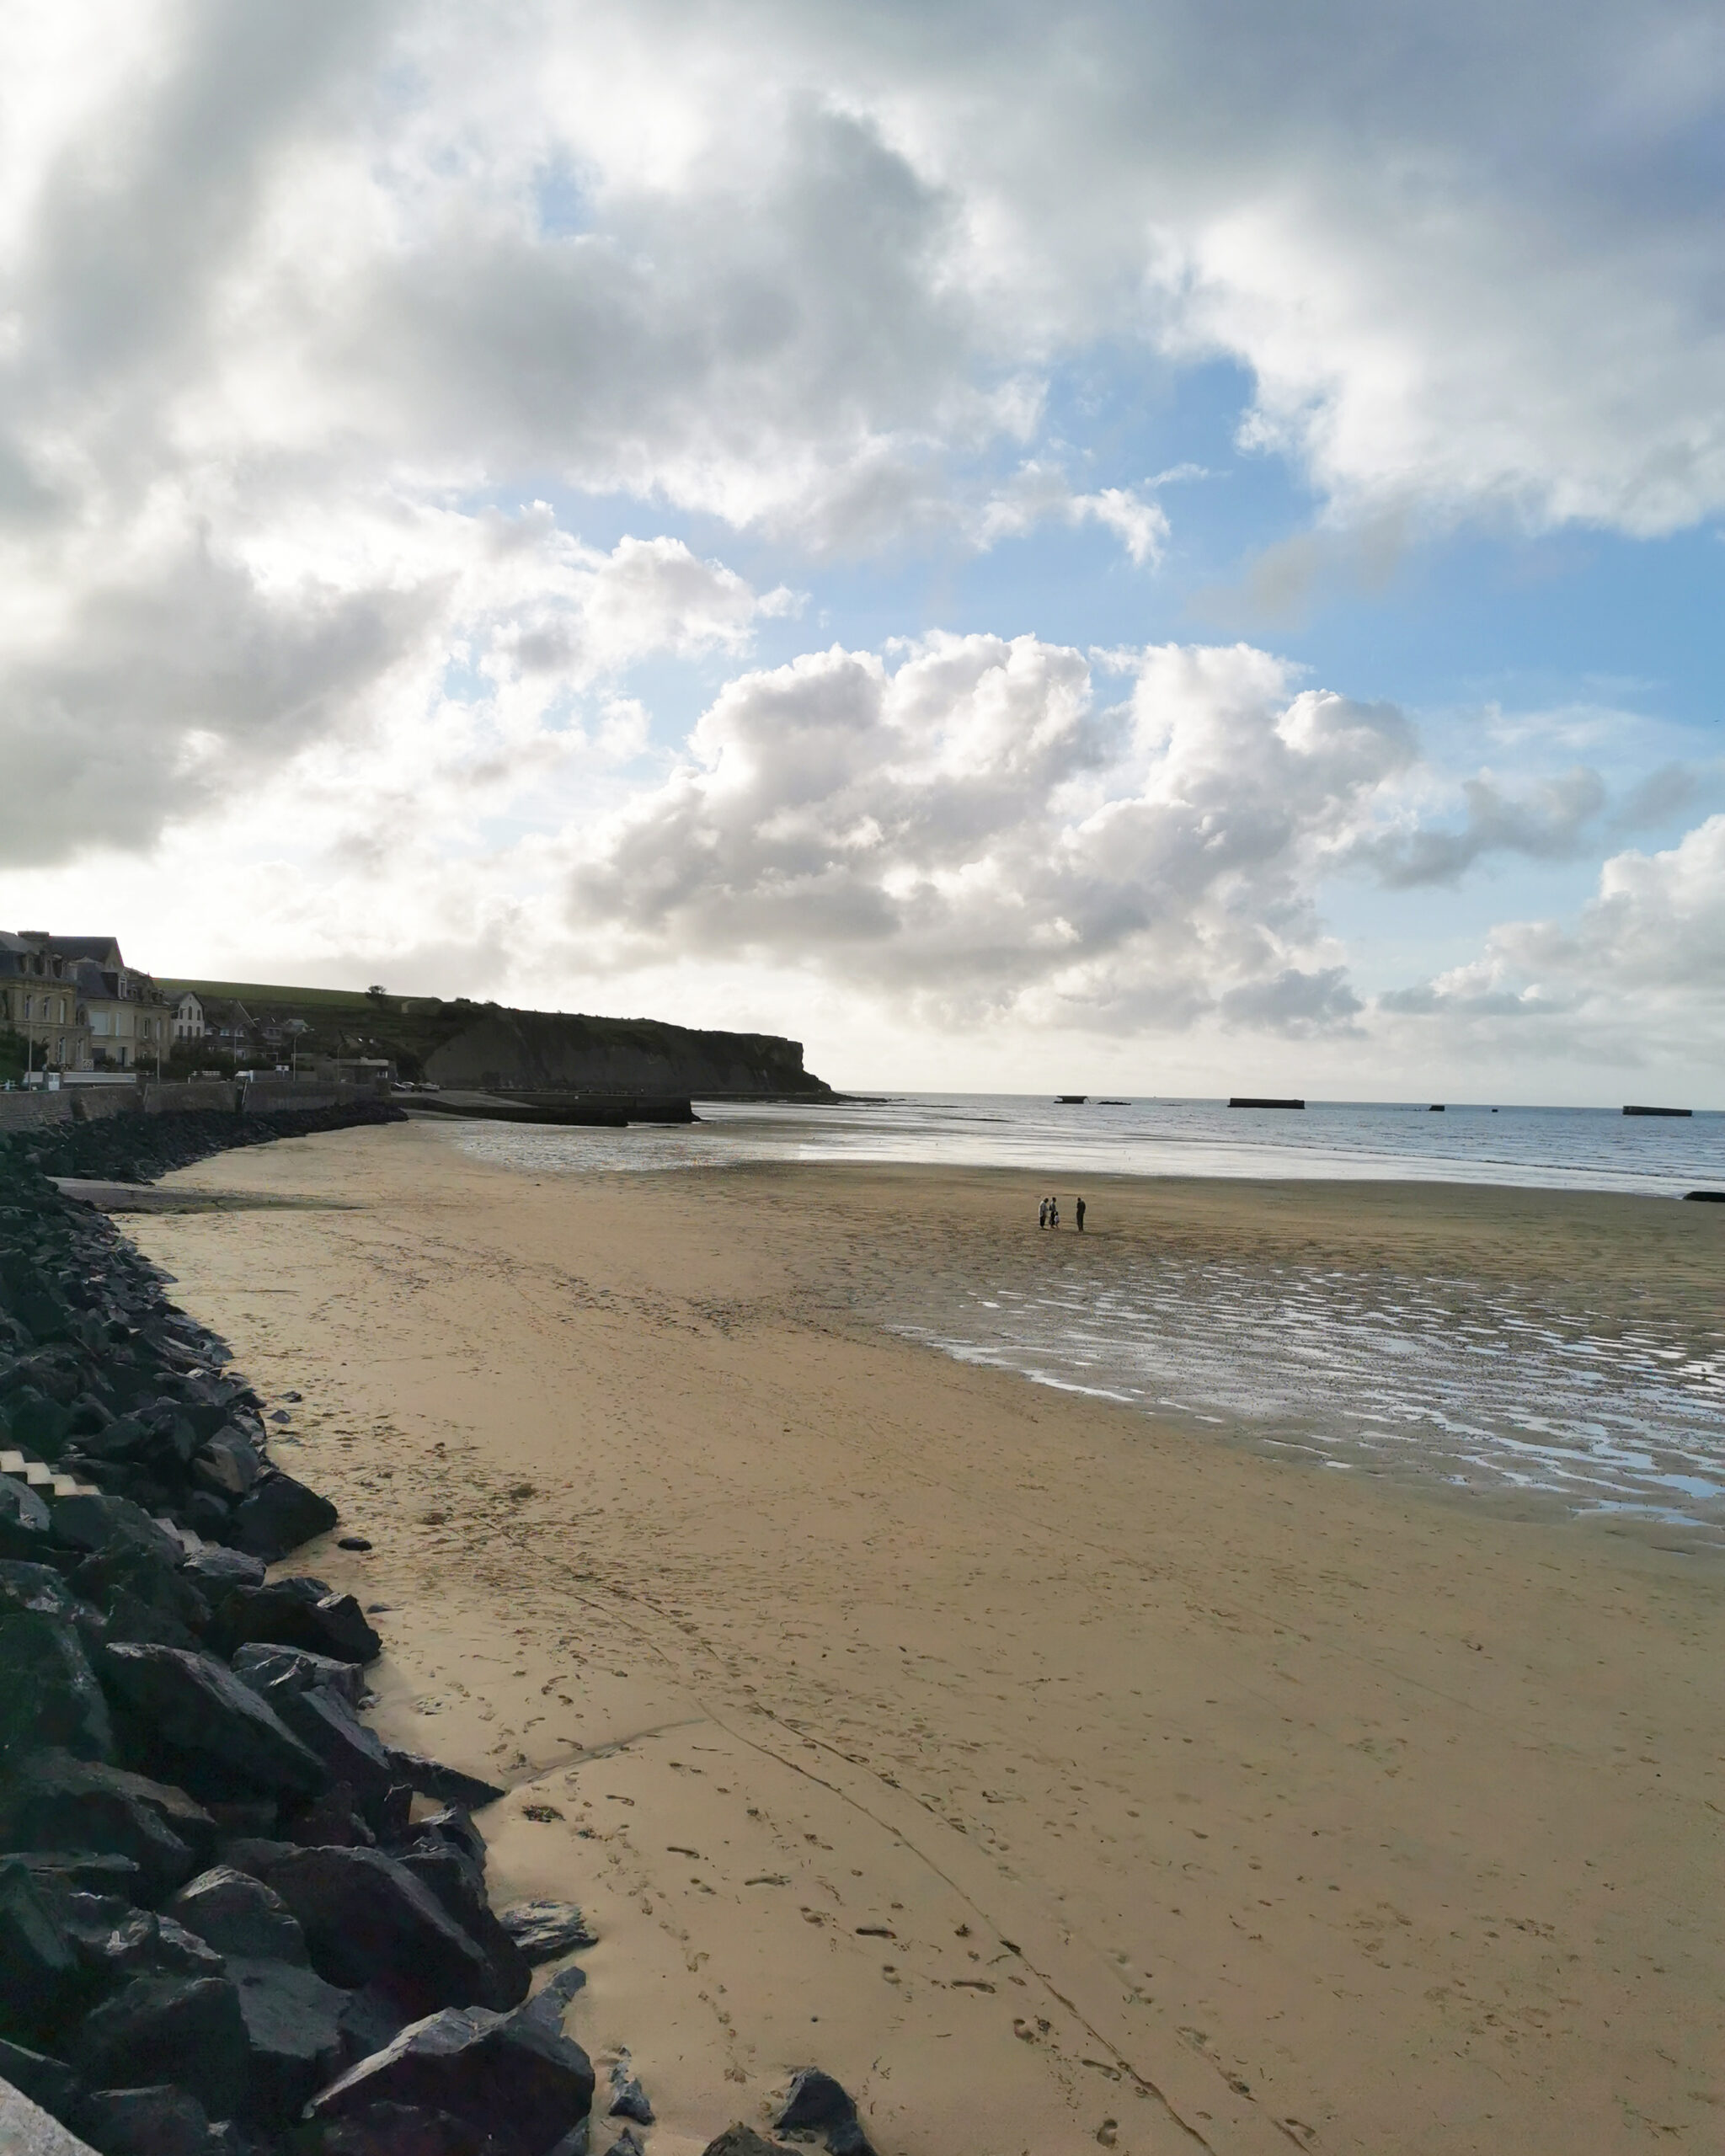 Things To Do In Normandy With Kids, Visit France, Visit Normandy, Normandy Tourism, Brittany Ferries, Family-Friendly, Family Holidays, Activities to Do, The Frenchie Mummy, Travel Blog, Family Travel, Cherbourg, French Beaches, WWII, Omaha Beach, La Cité De La Mer, Arromanches